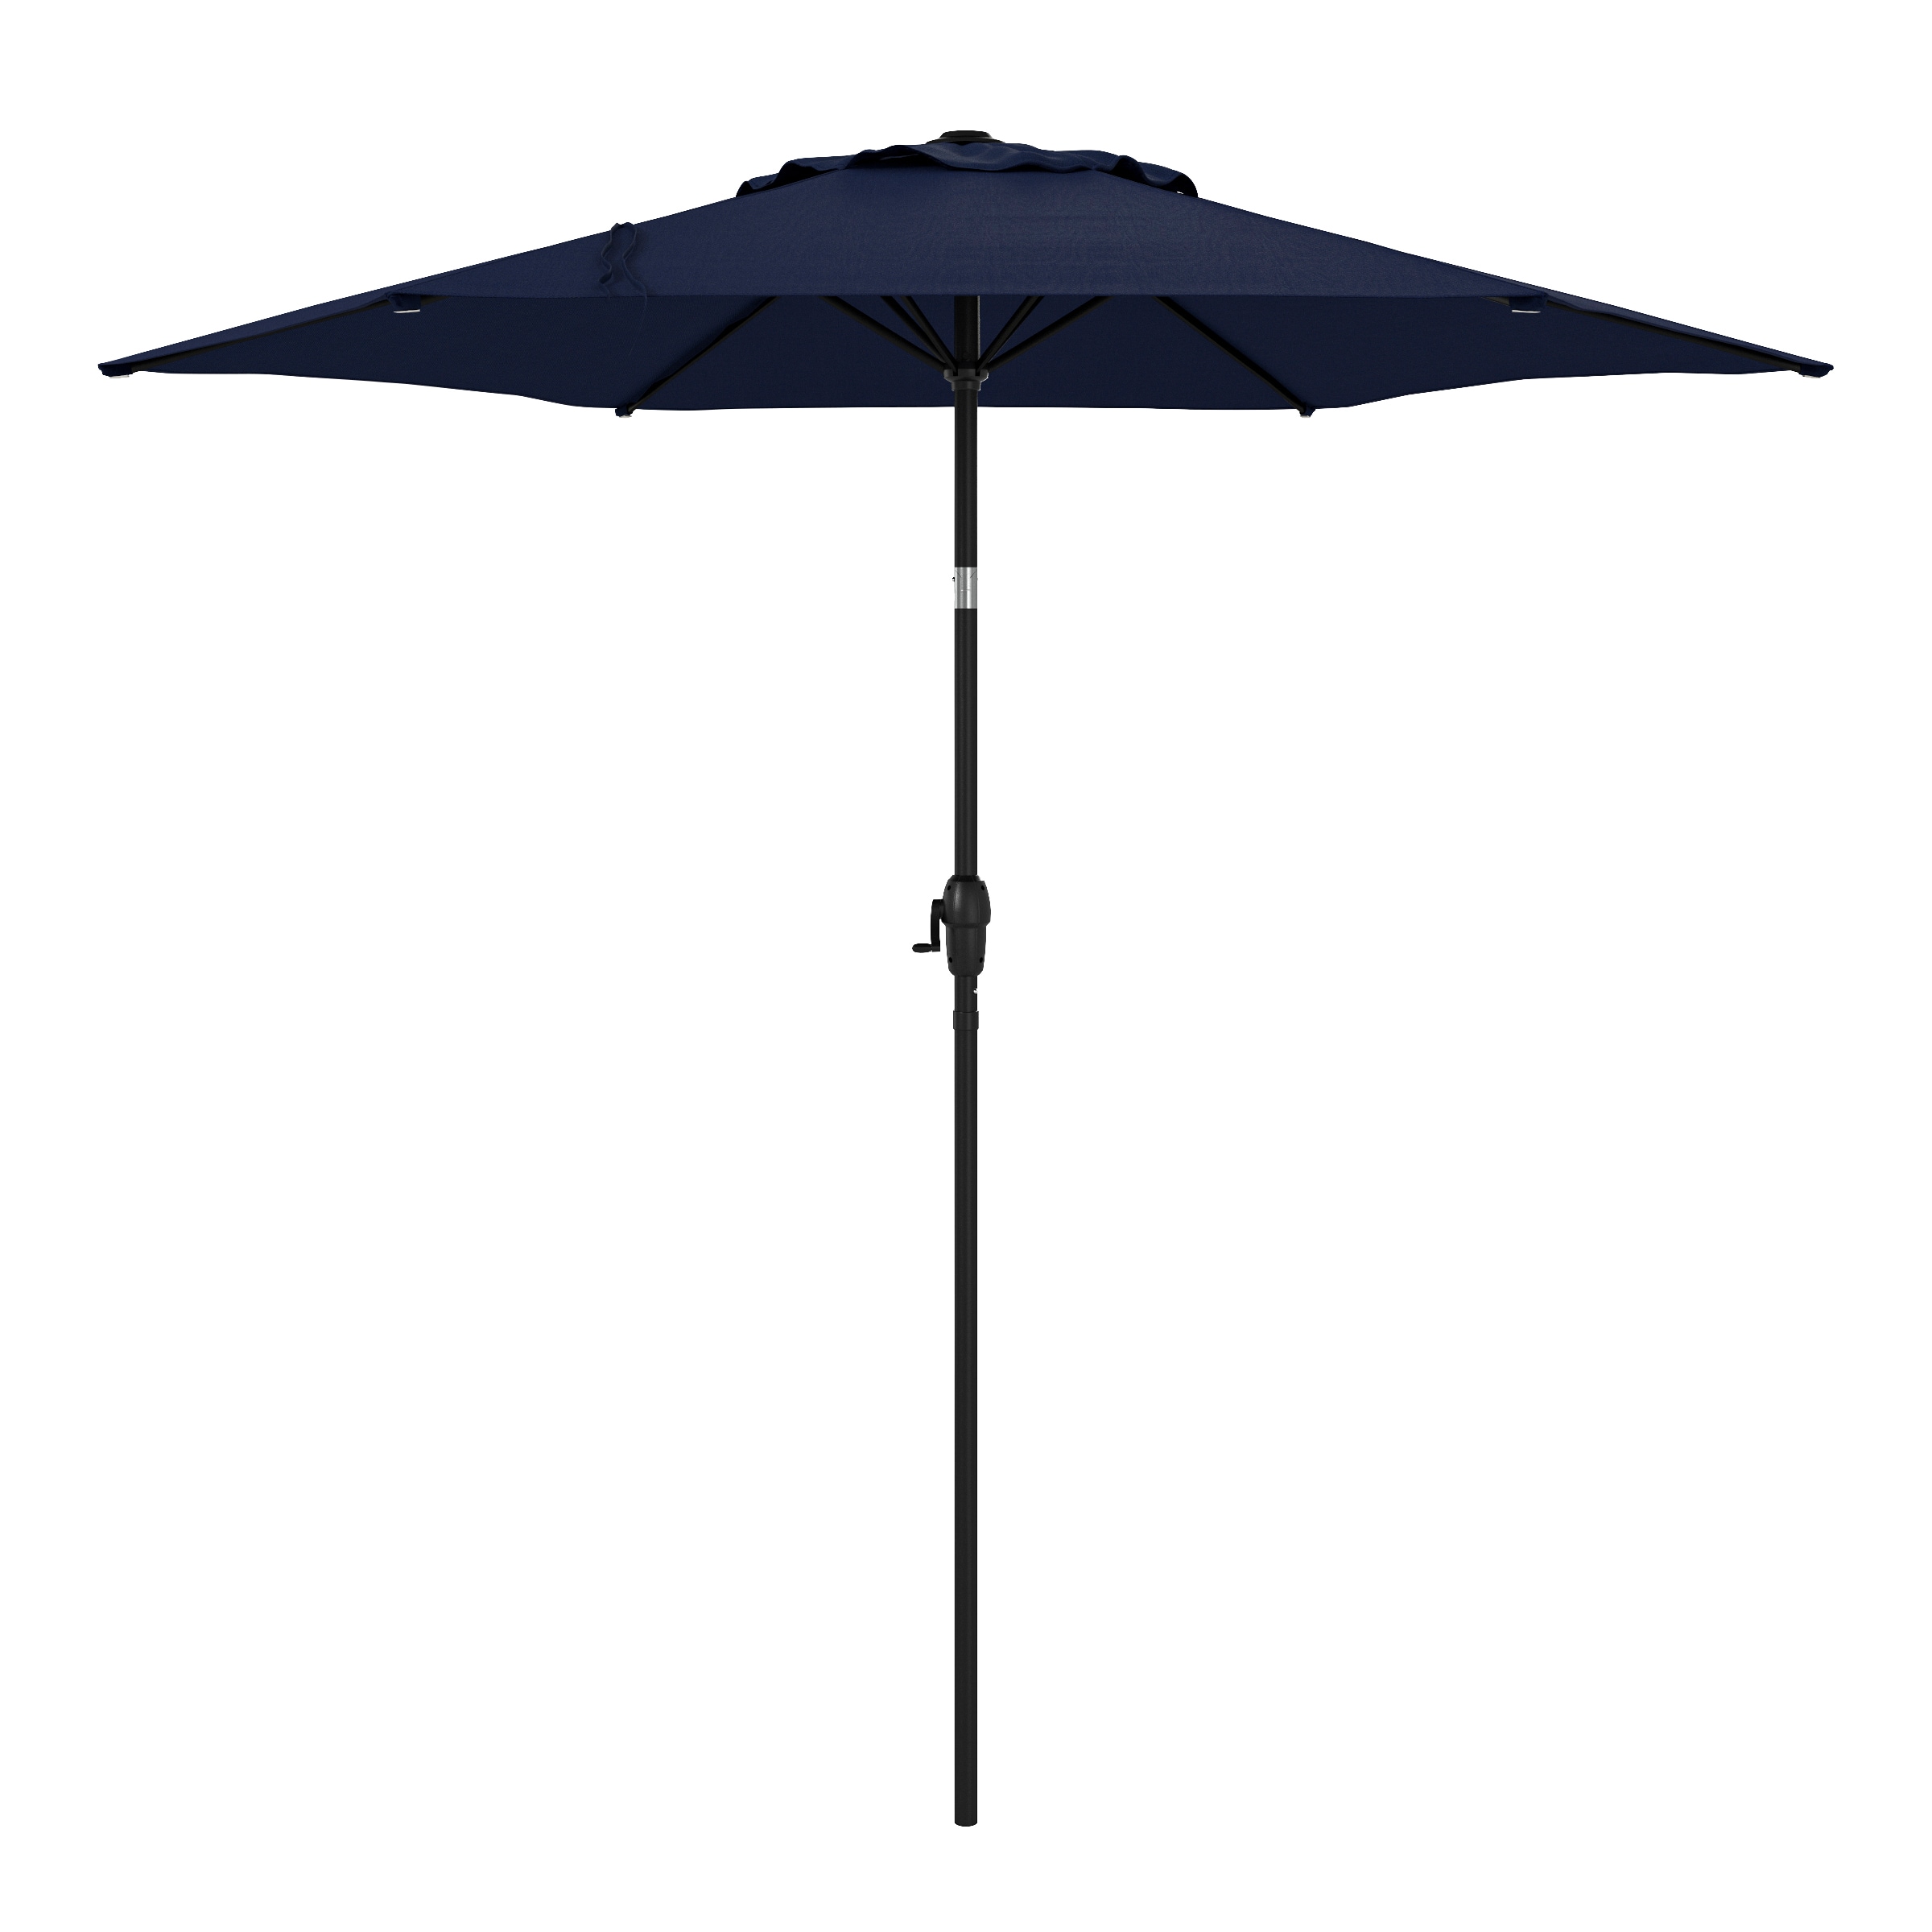 7.5' Style Selections Push-button Tilt Market Patio Umbrella (Blue or Red) $29 at Lowe's w/ Free Store Pickup